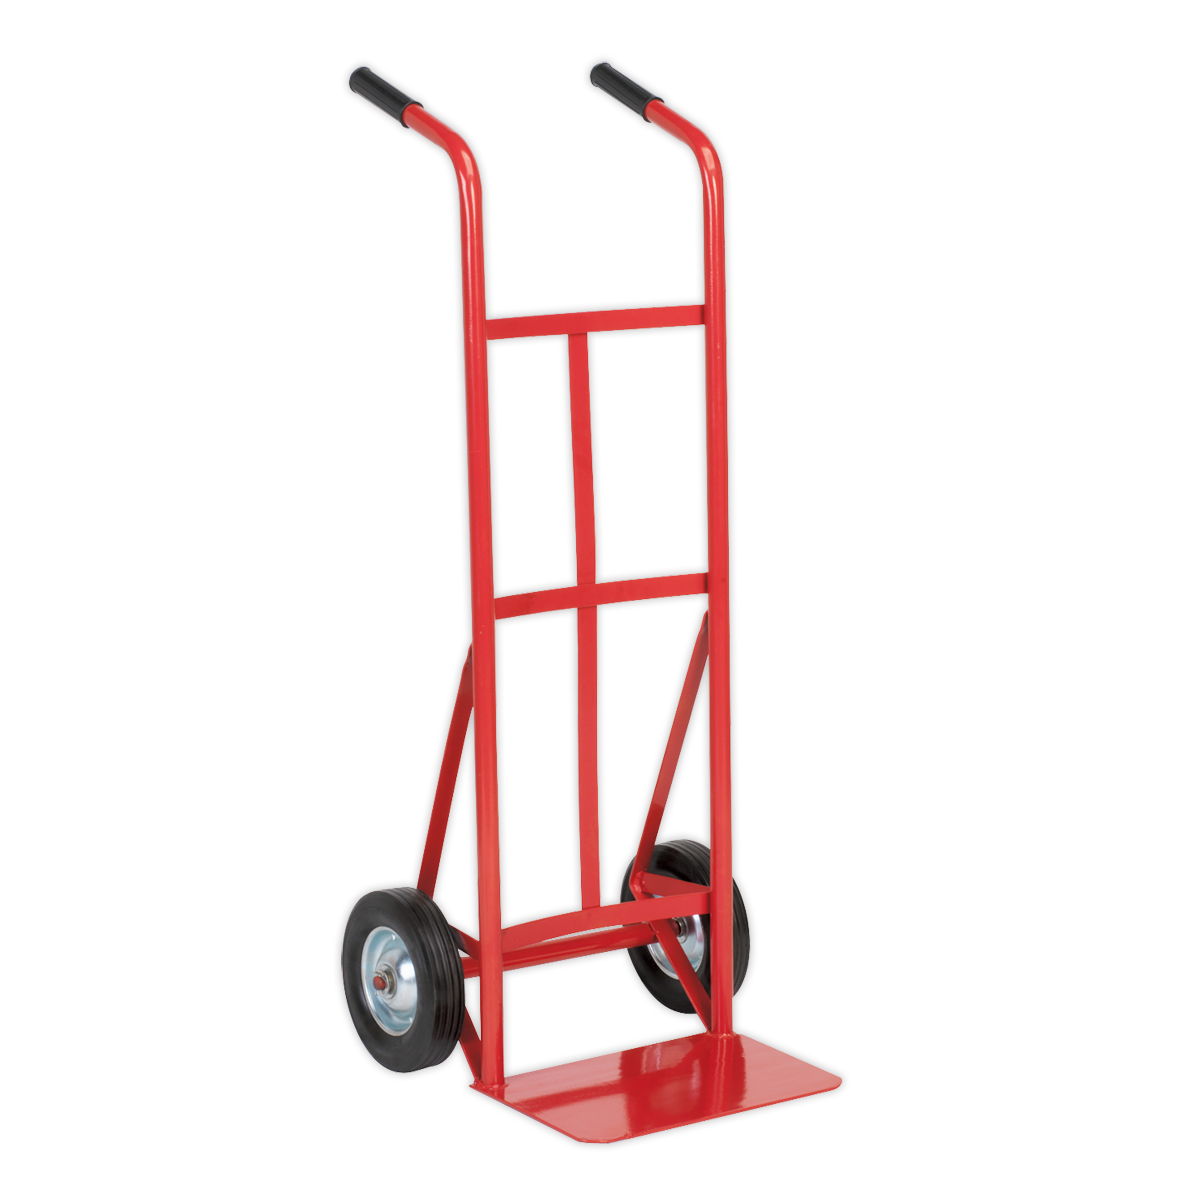 Sack Truck with Solid Tyres 150kg Capacity